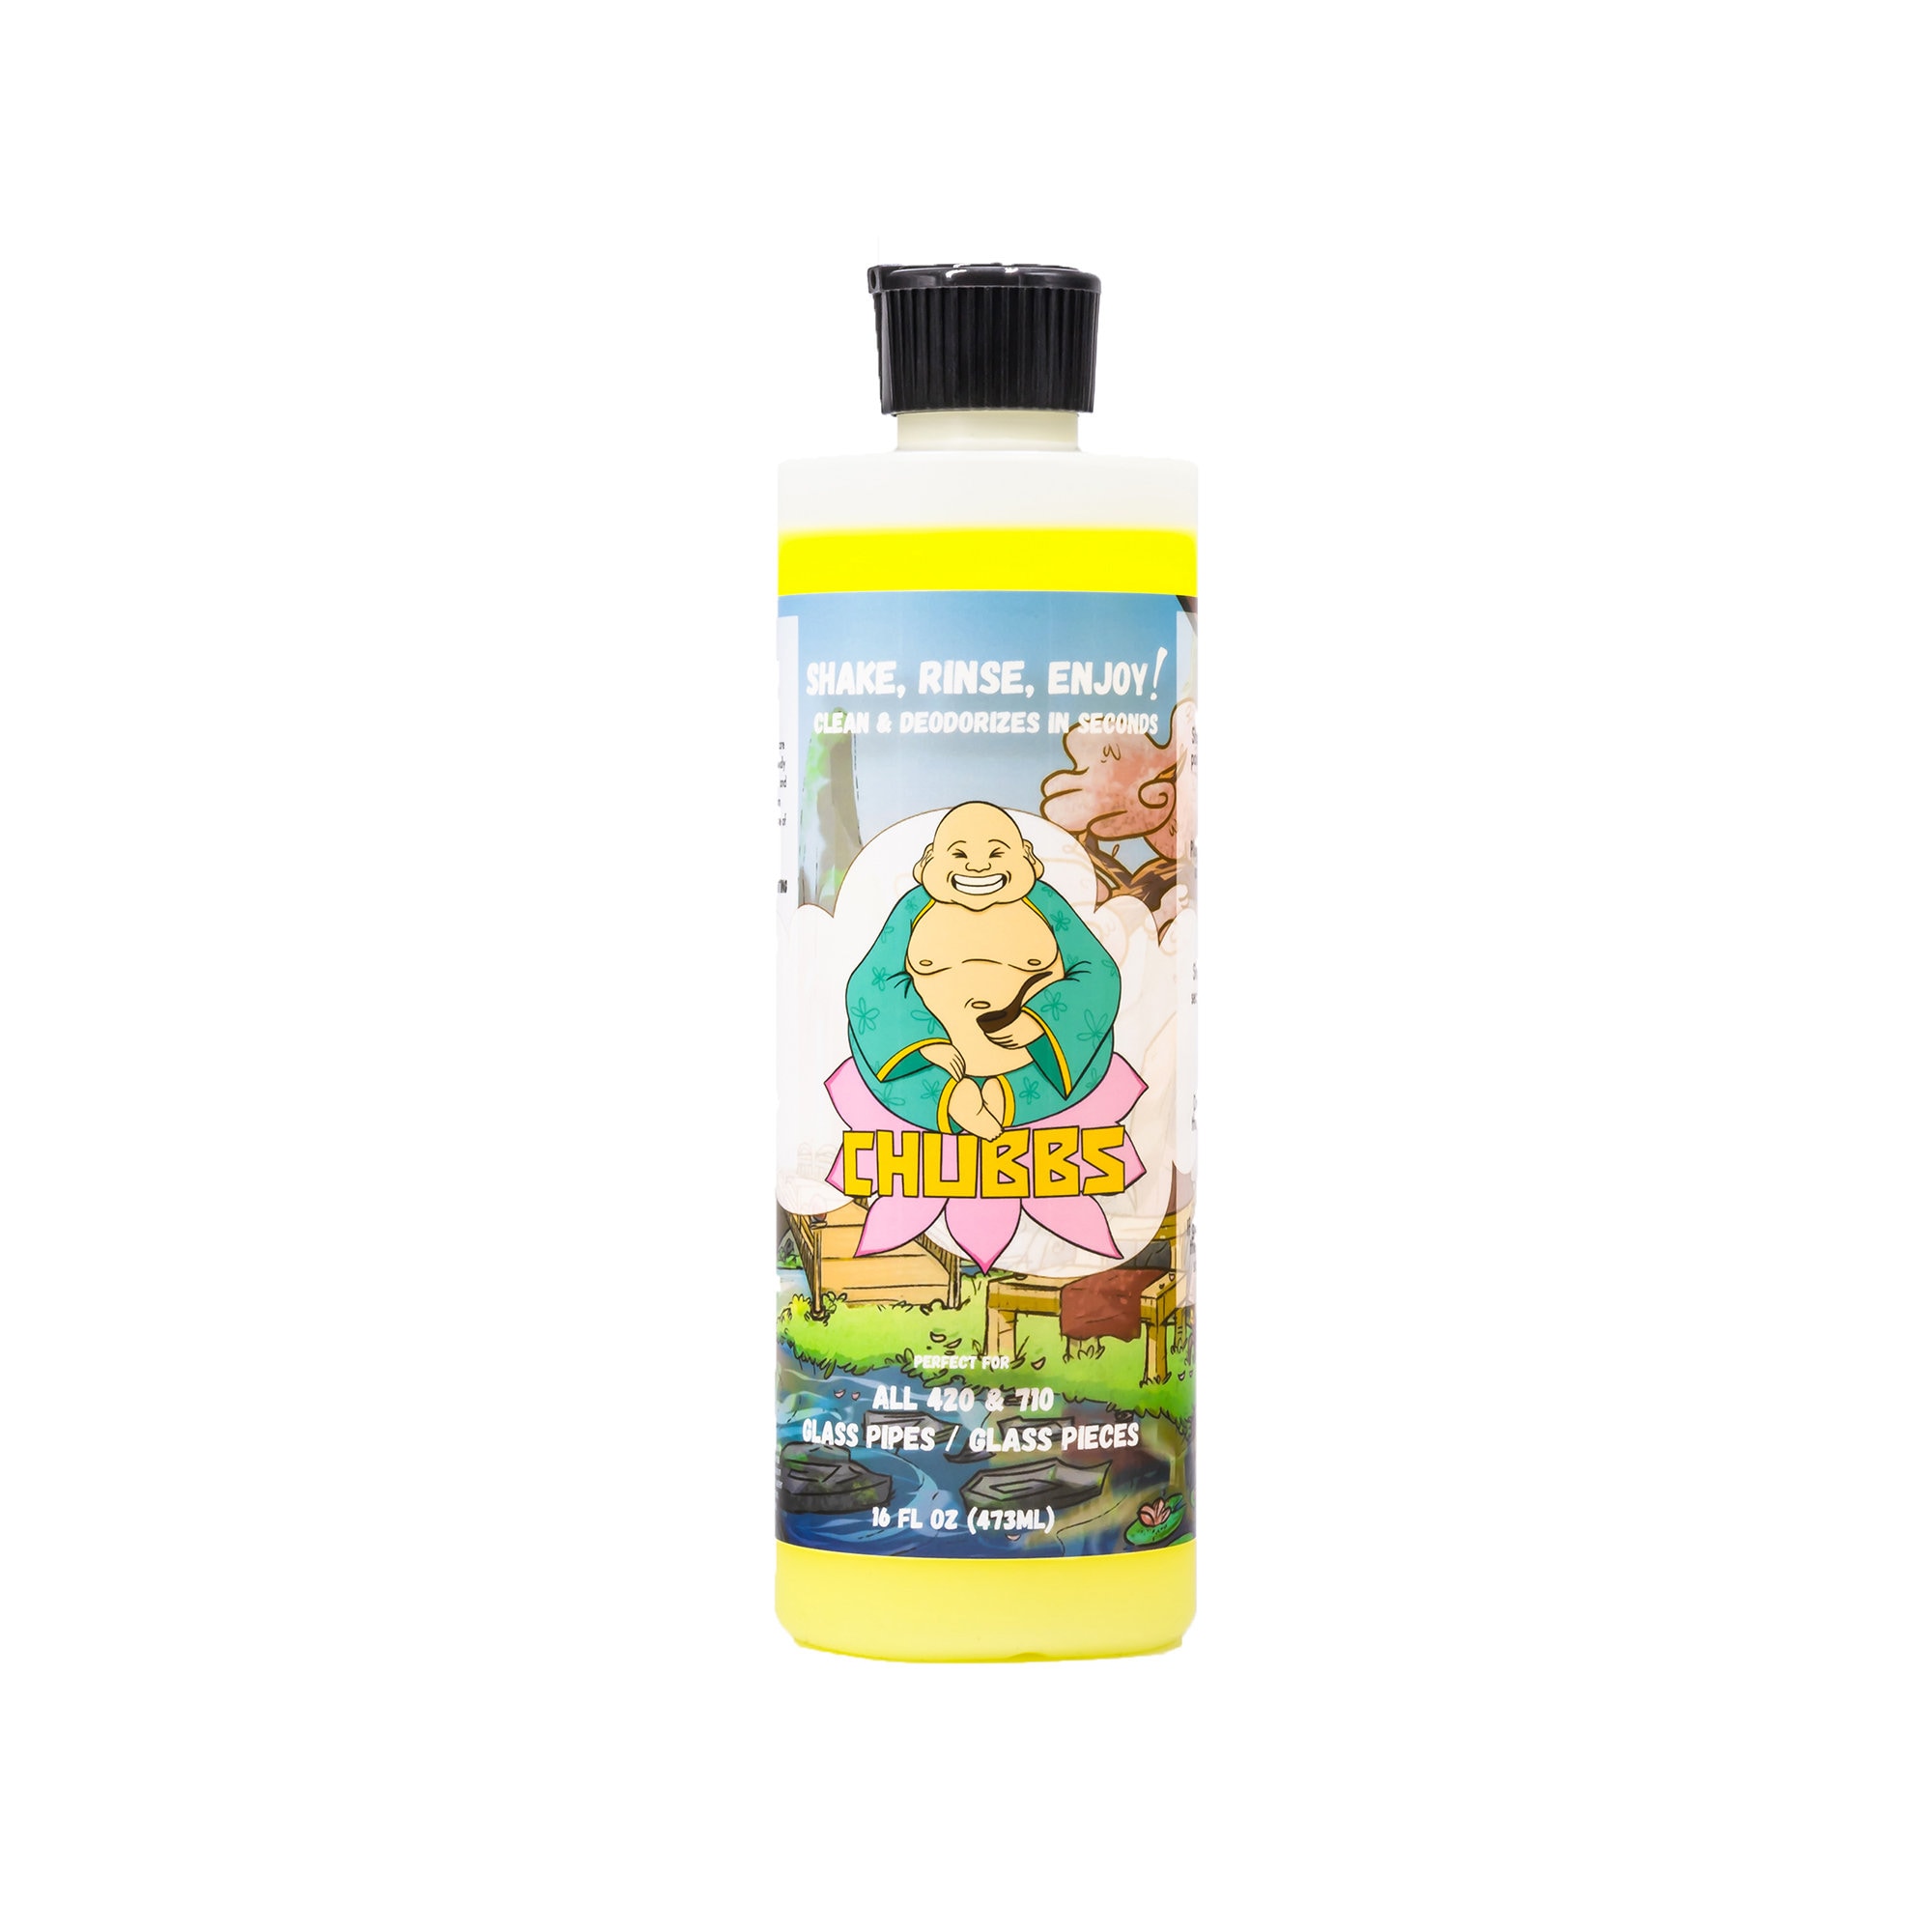 Formula 710 Instant Cleaner - Clean and Deodorize Your Bong